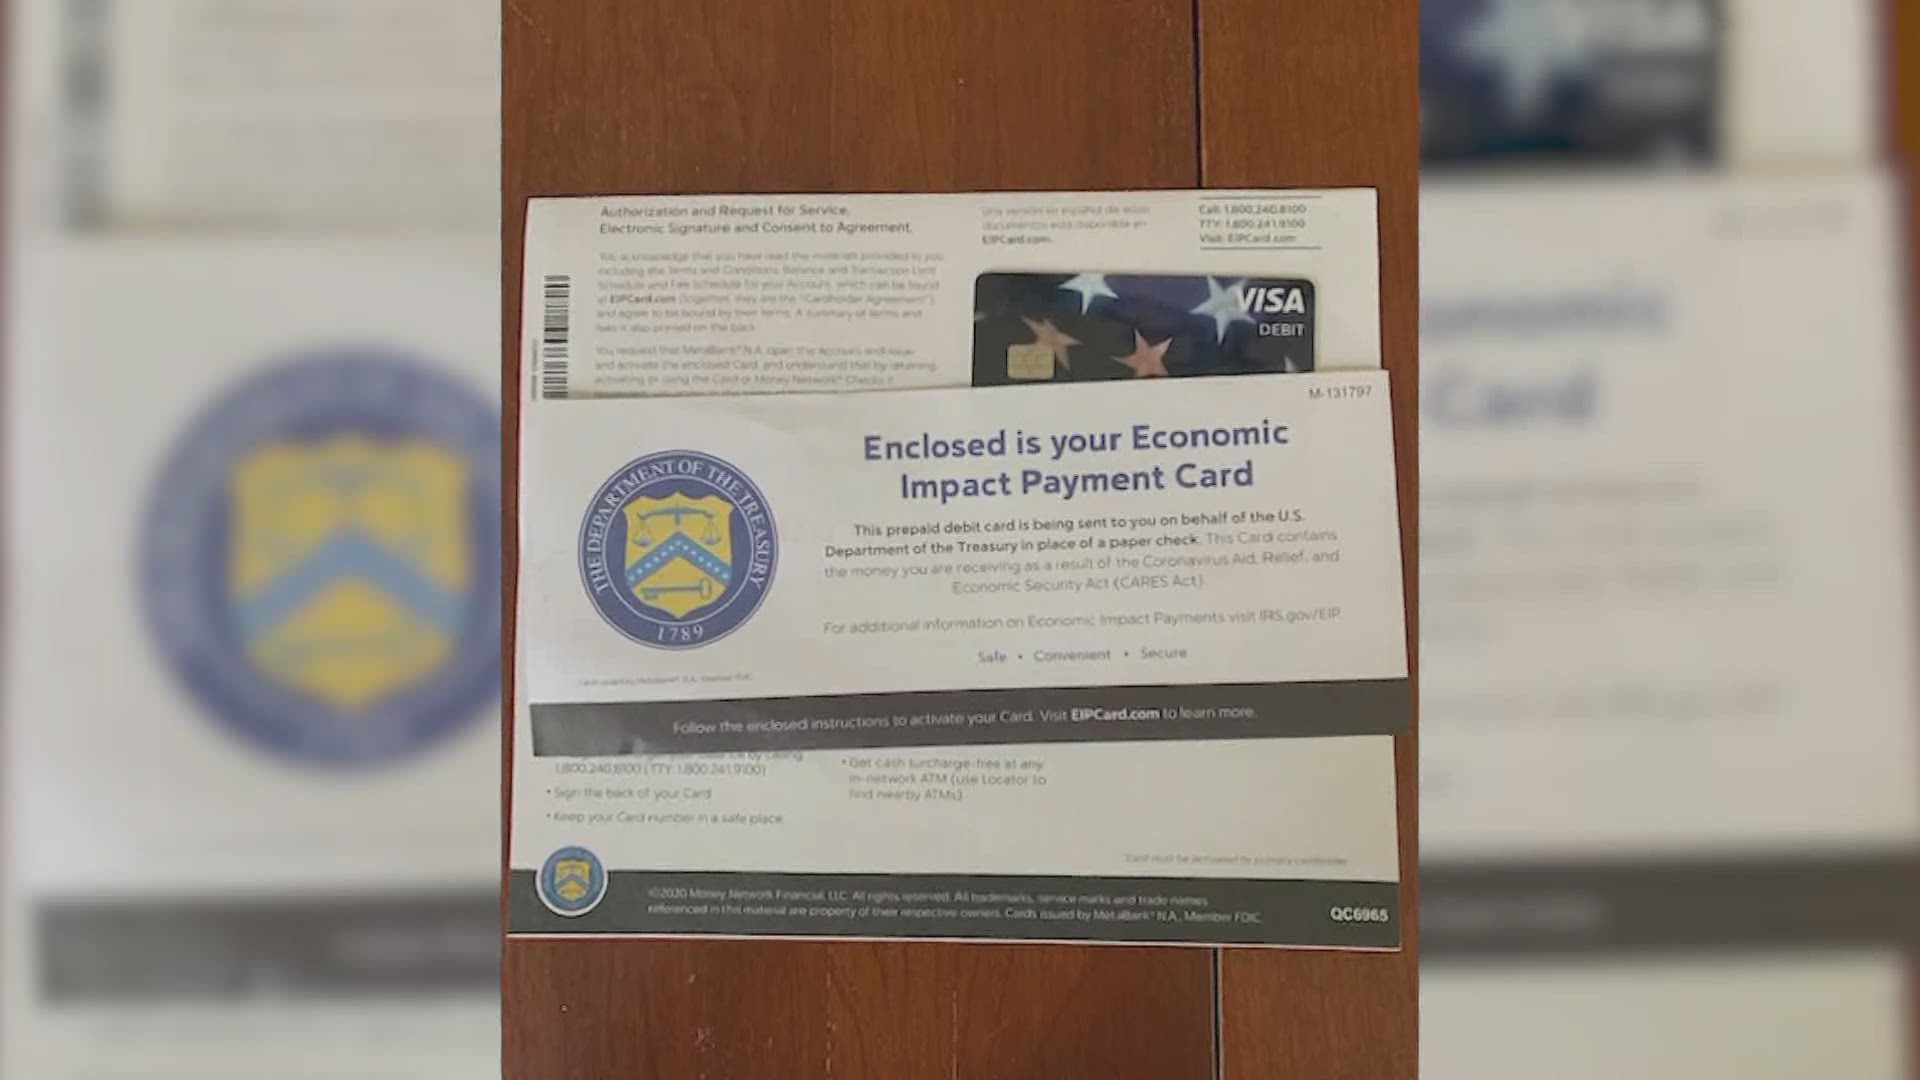 A Belton woman is warning others after finding her stimulus payment on a debit card in a plain envelope from 'Money Network Cardholder Services.'